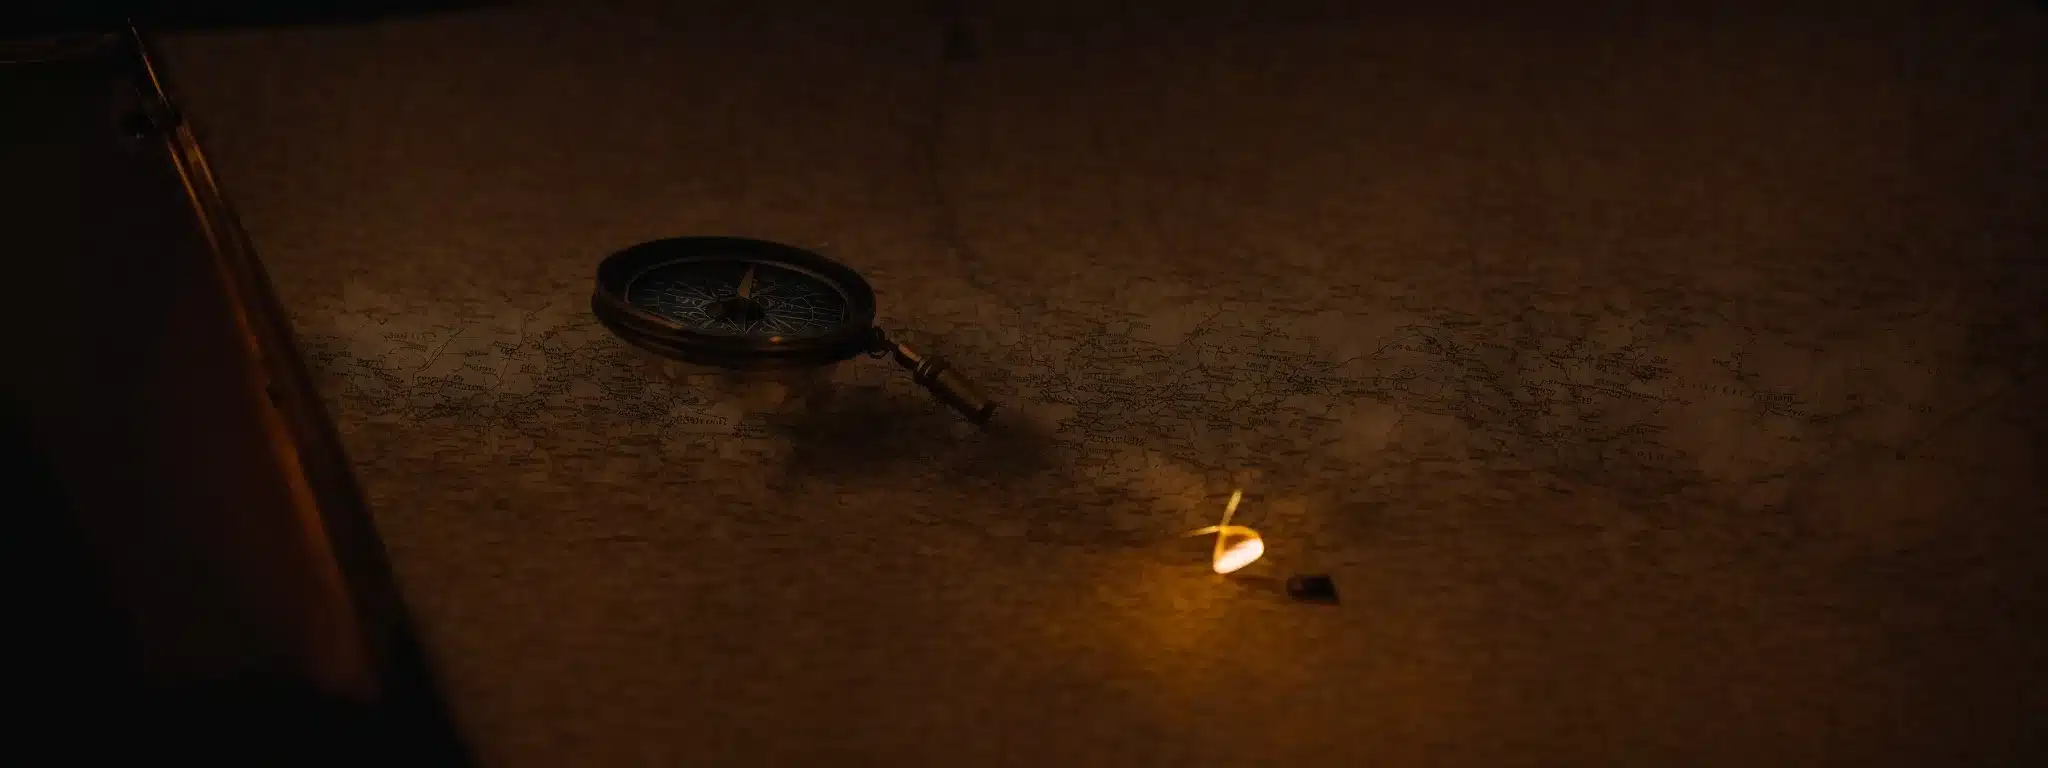 A Compass Resting On An Ancient Map Under A Soft Glowing Lantern, Symbolizing Navigational Guidance On A Strategic Journey.